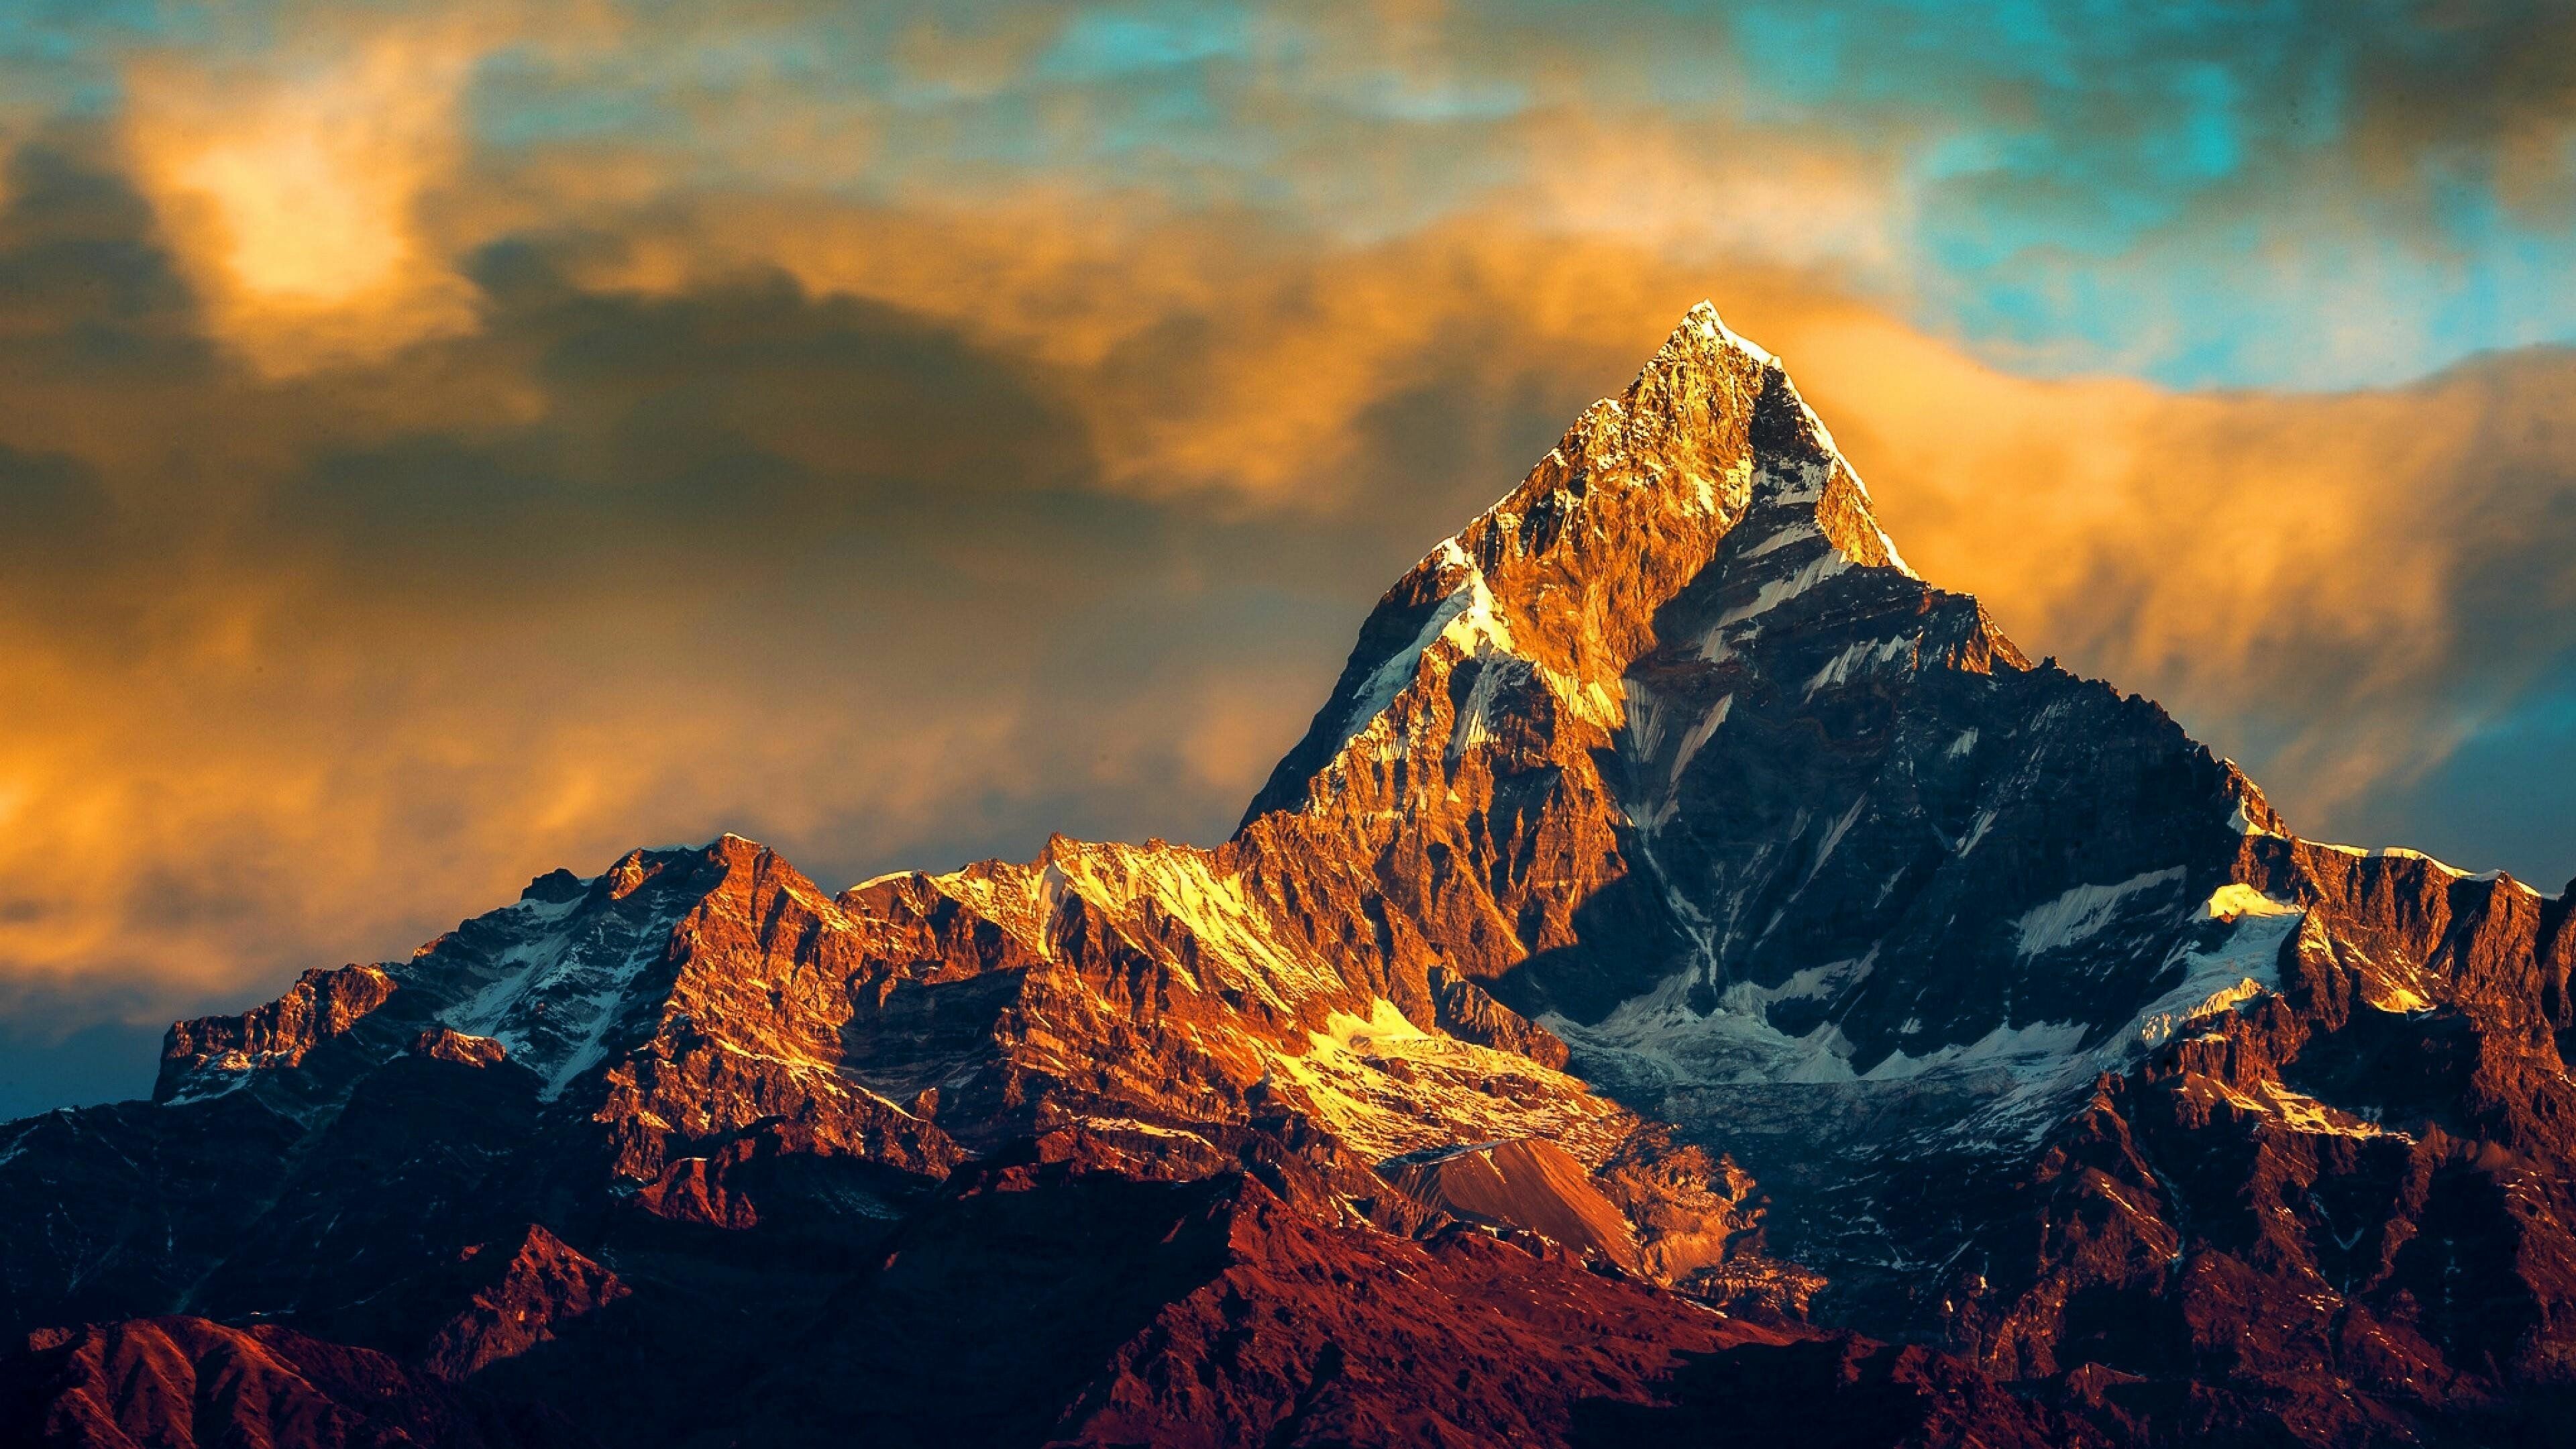 Mount Everest: The highest point on Earth at 8848.86 meters above sea level. 3840x2160 4K Wallpaper.